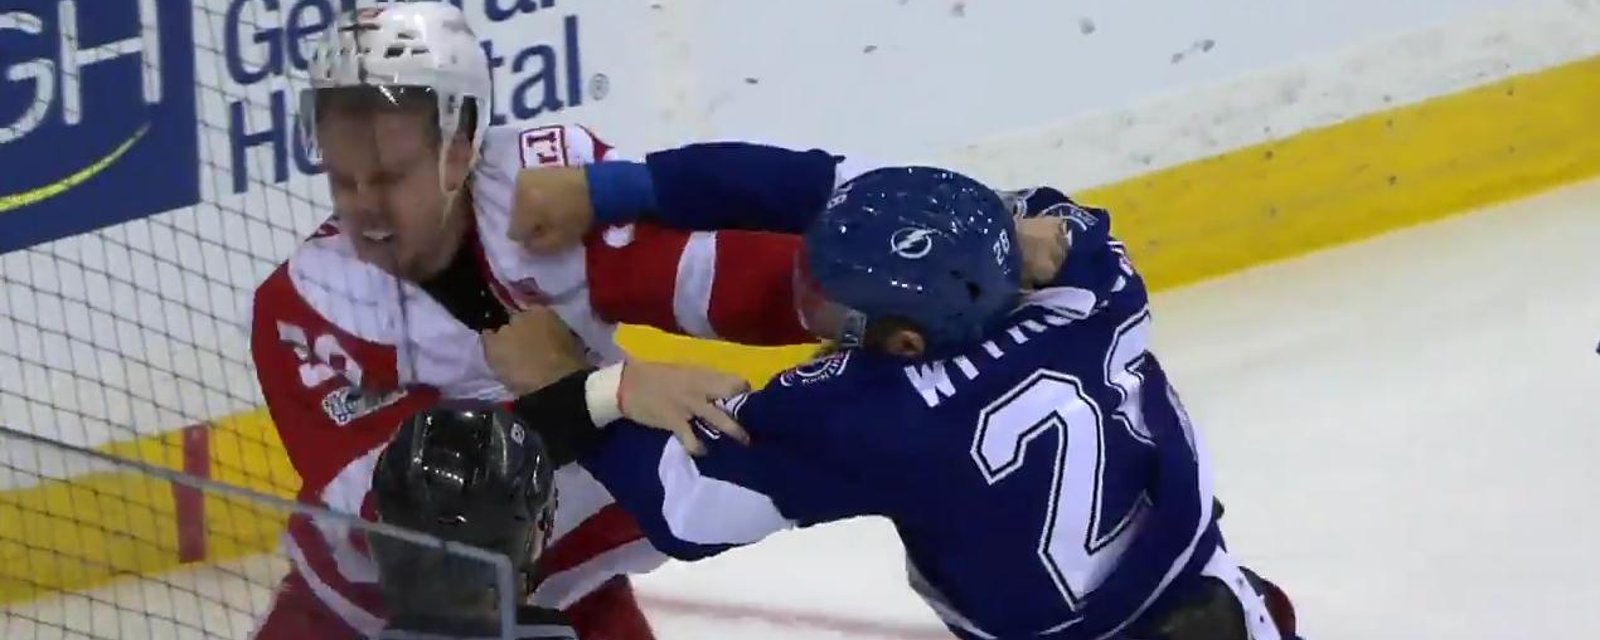 BREAKING : Anthony Mantha out for the season after intense fight! 